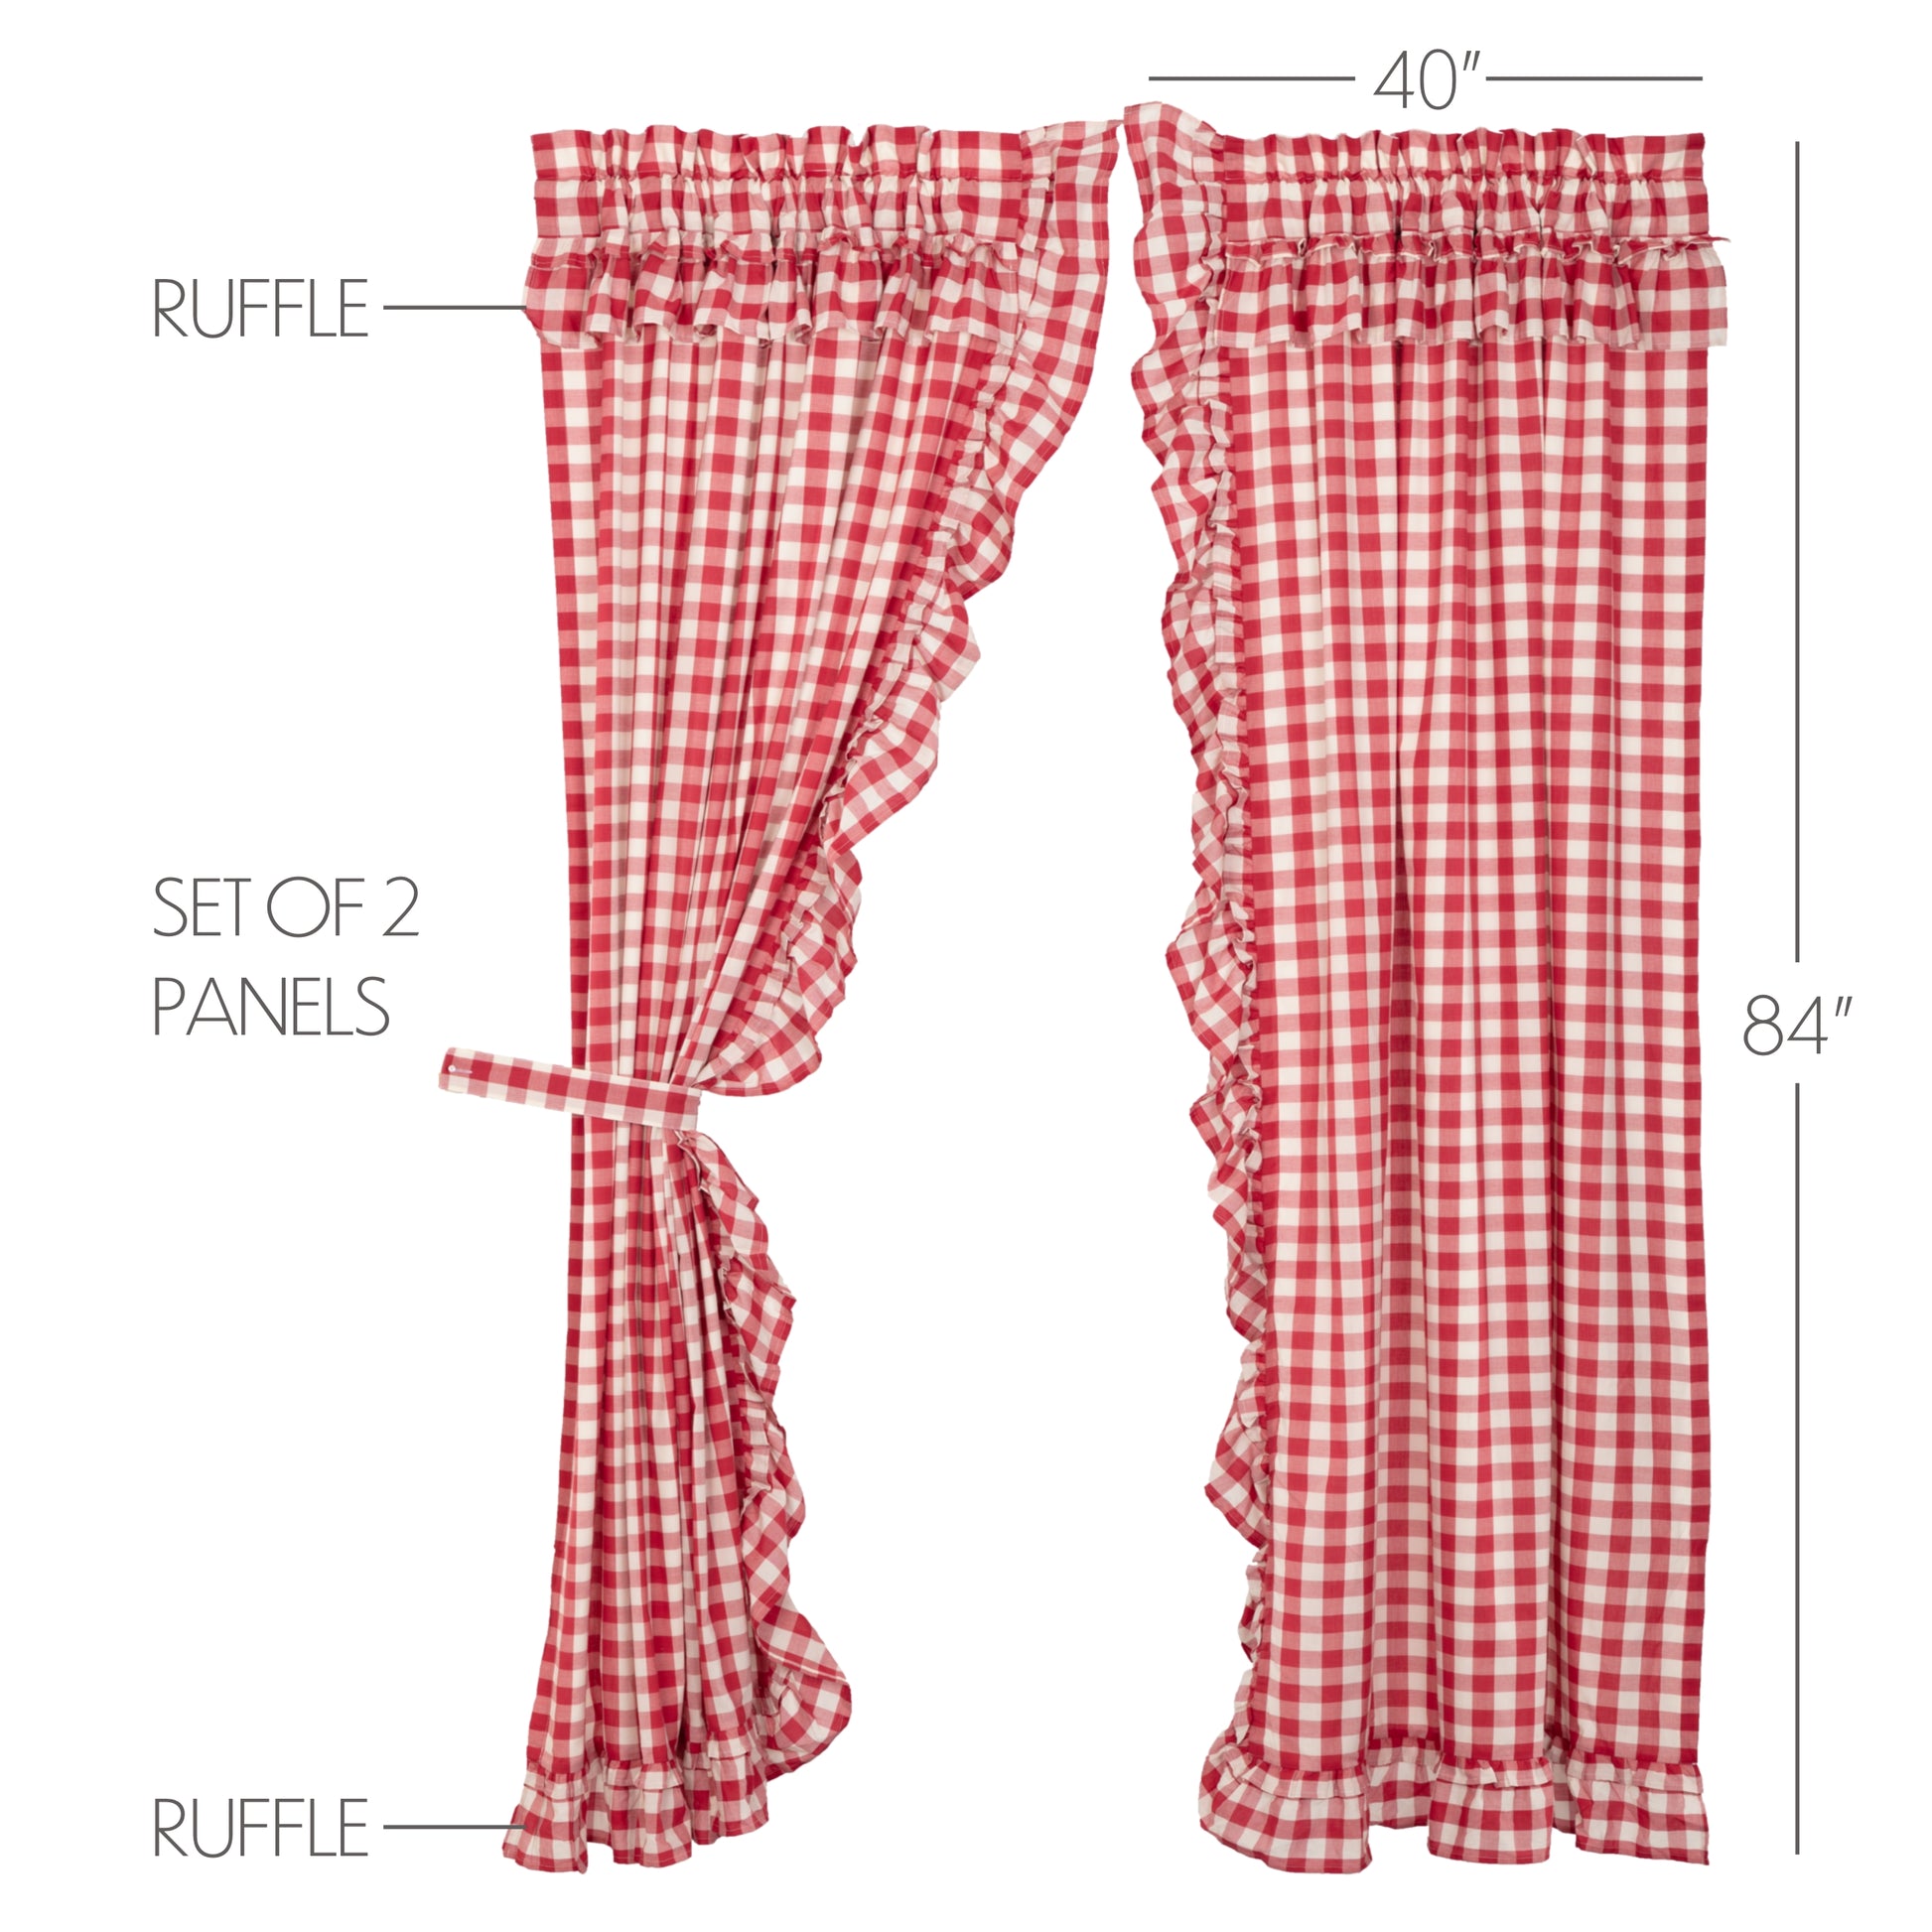 51117-Annie-Buffalo-Red-Check-Ruffled-Panel-Set-of-2-84x40-image-1